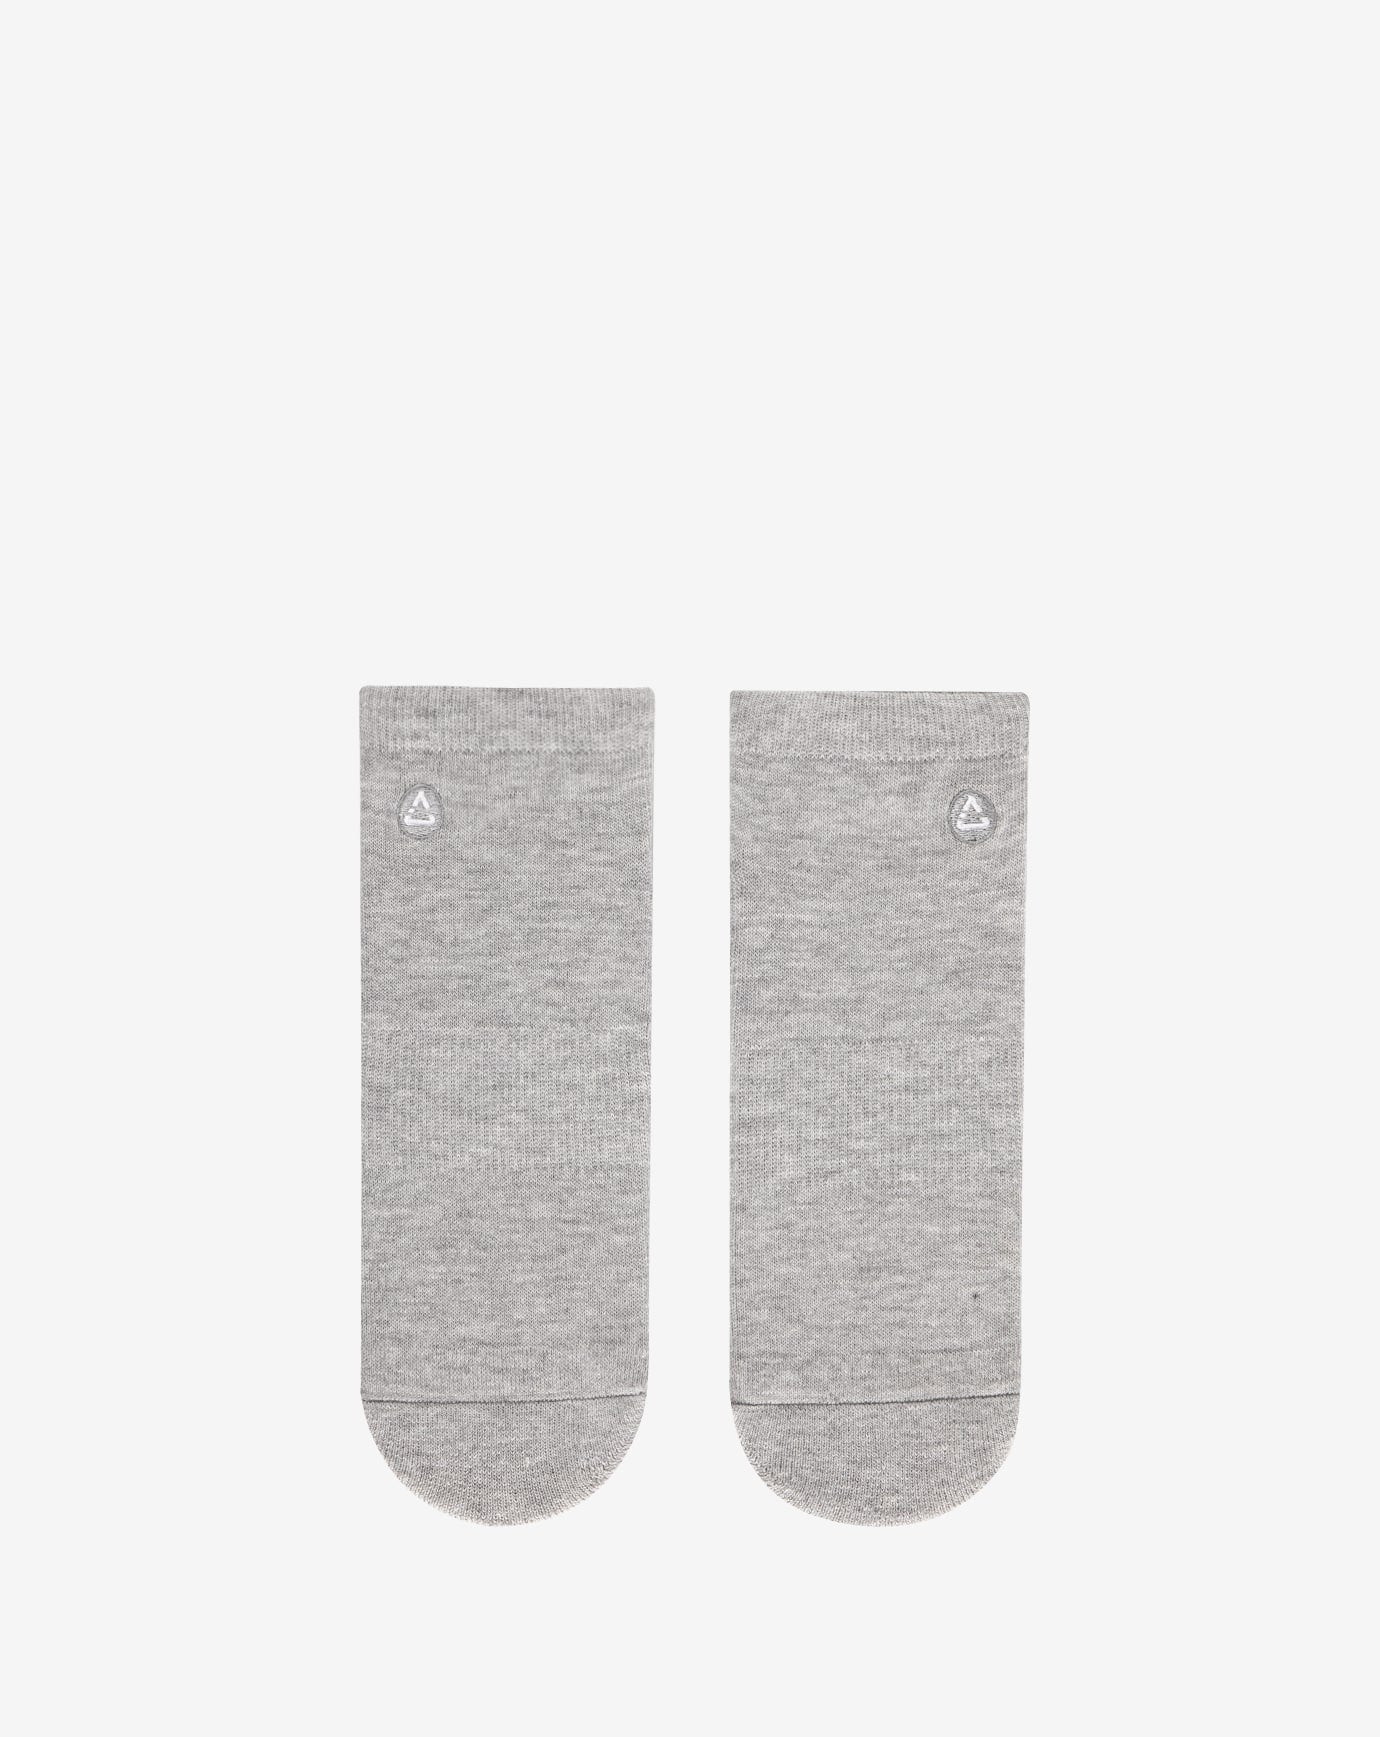 Cuater Ankle Socks